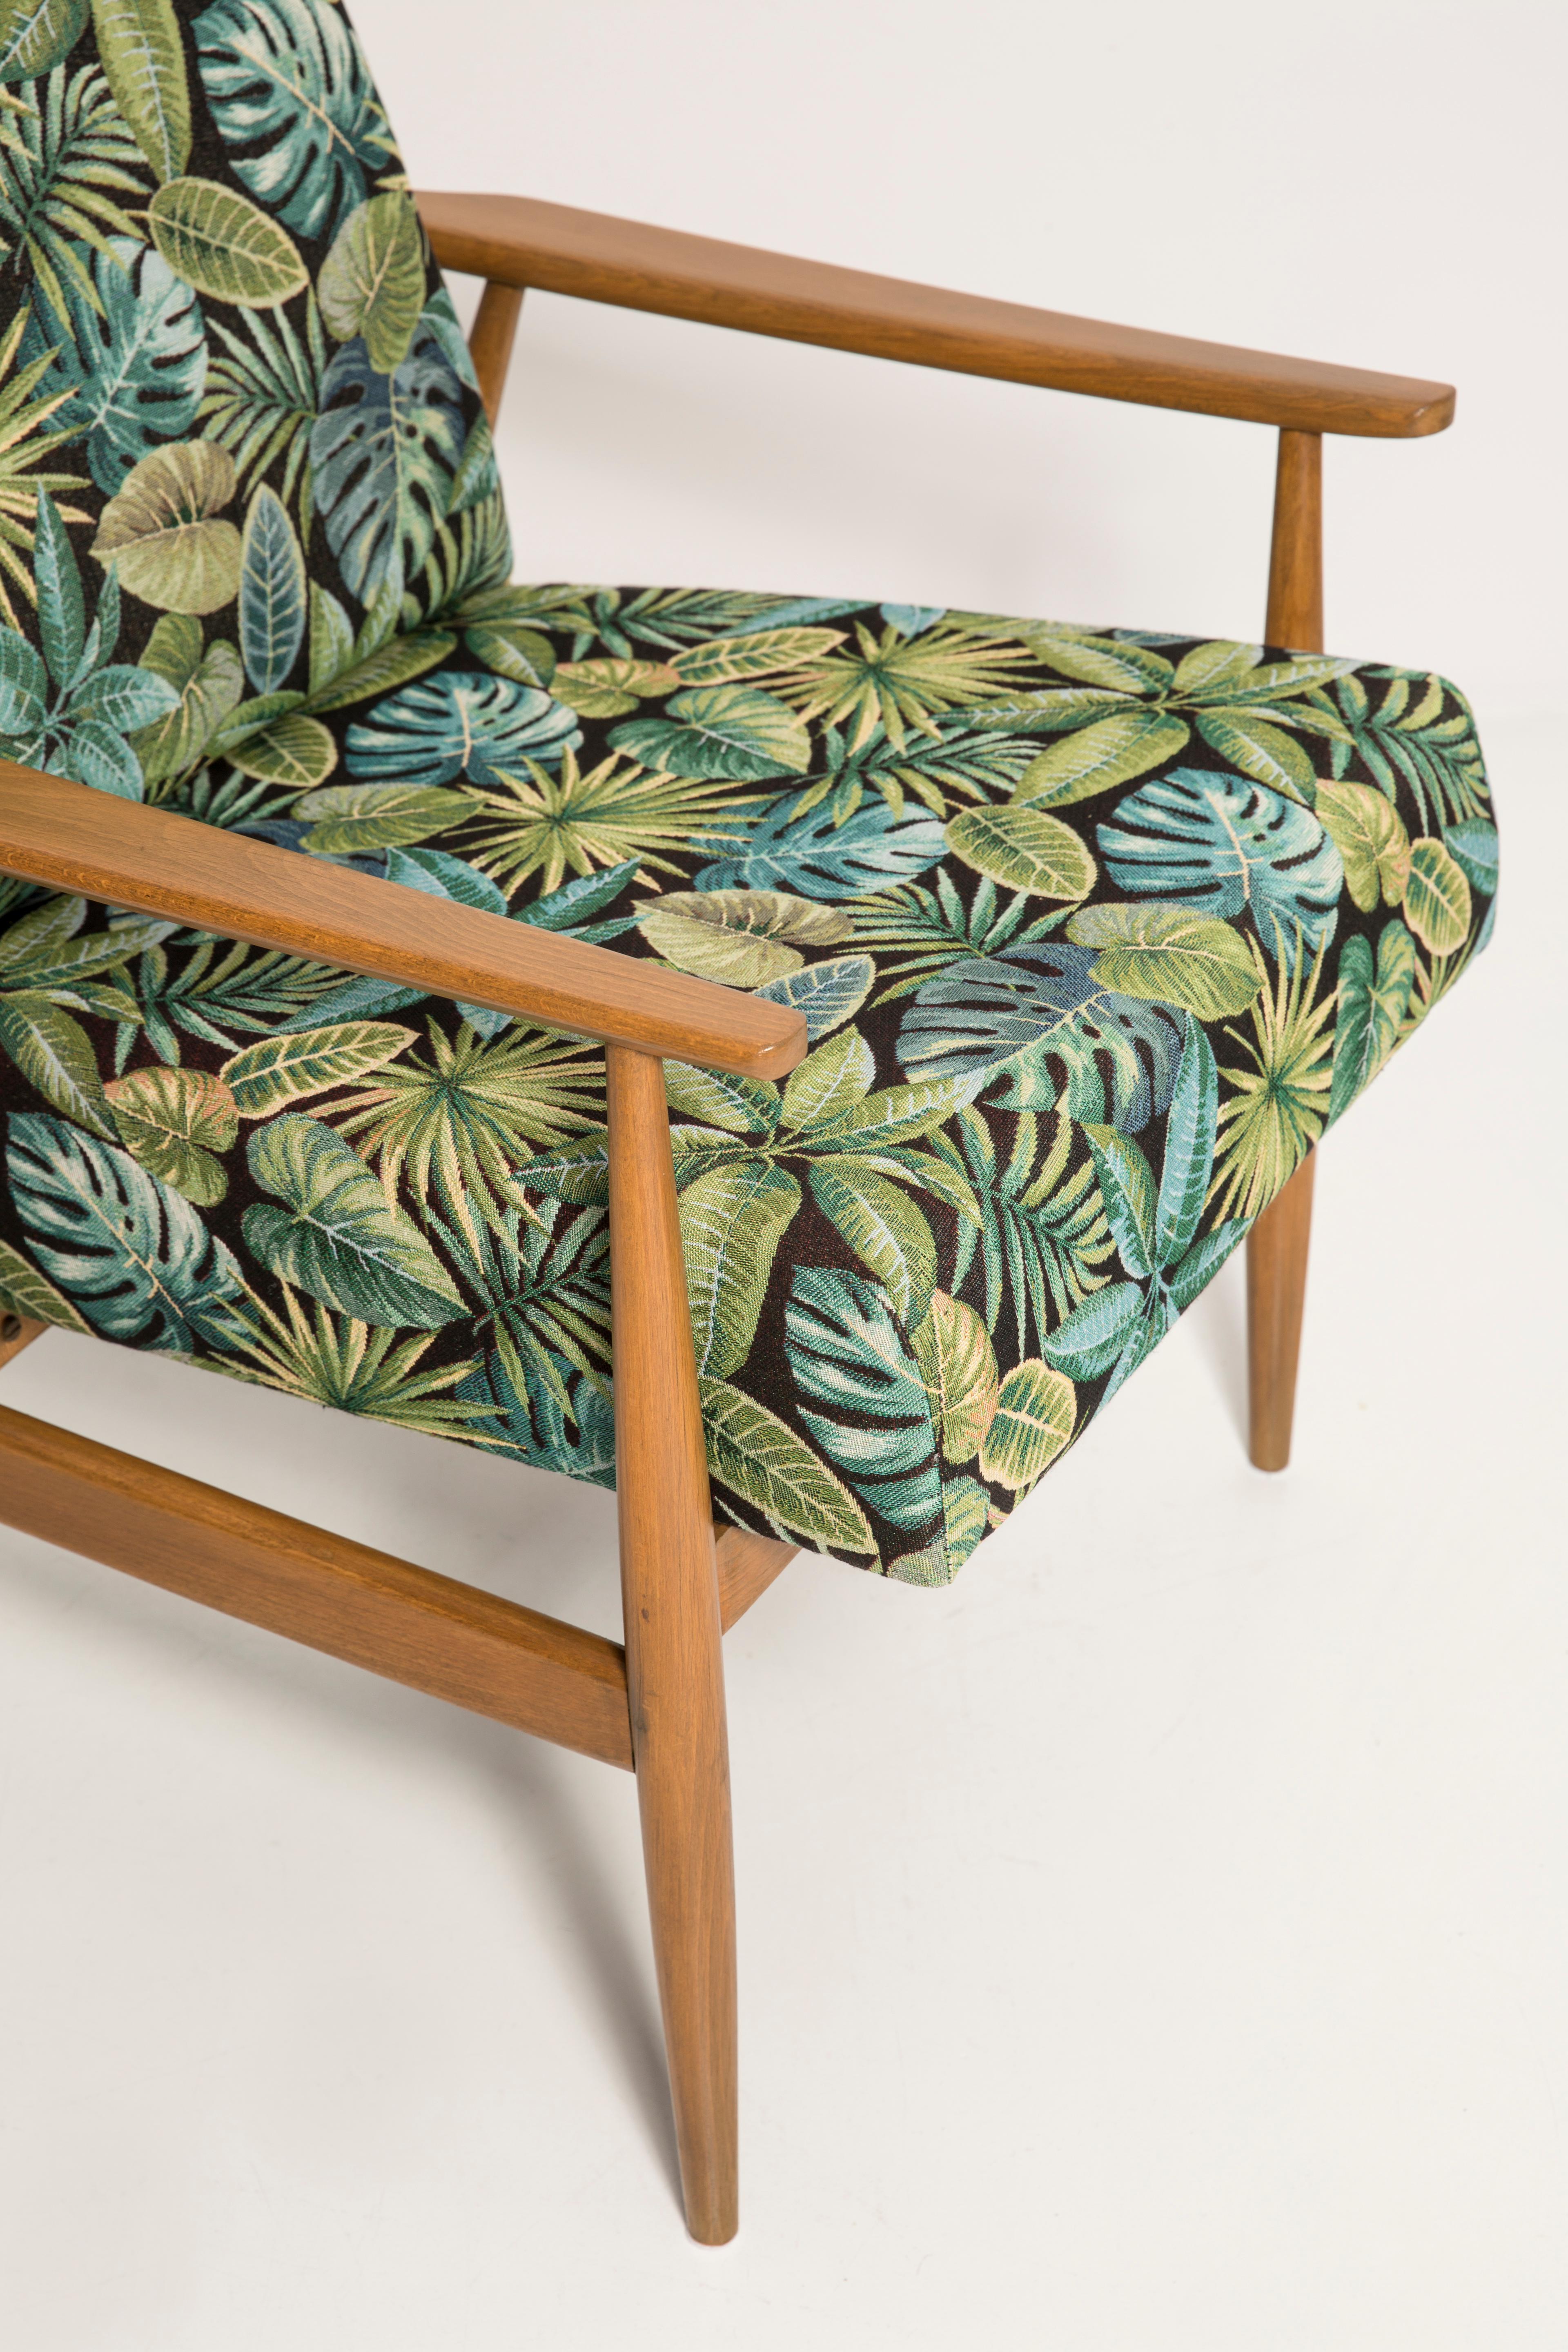 Pair of Mid-Century Green Leaves Jacquard Dante Armchairs, H. Lis, 1960s For Sale 1